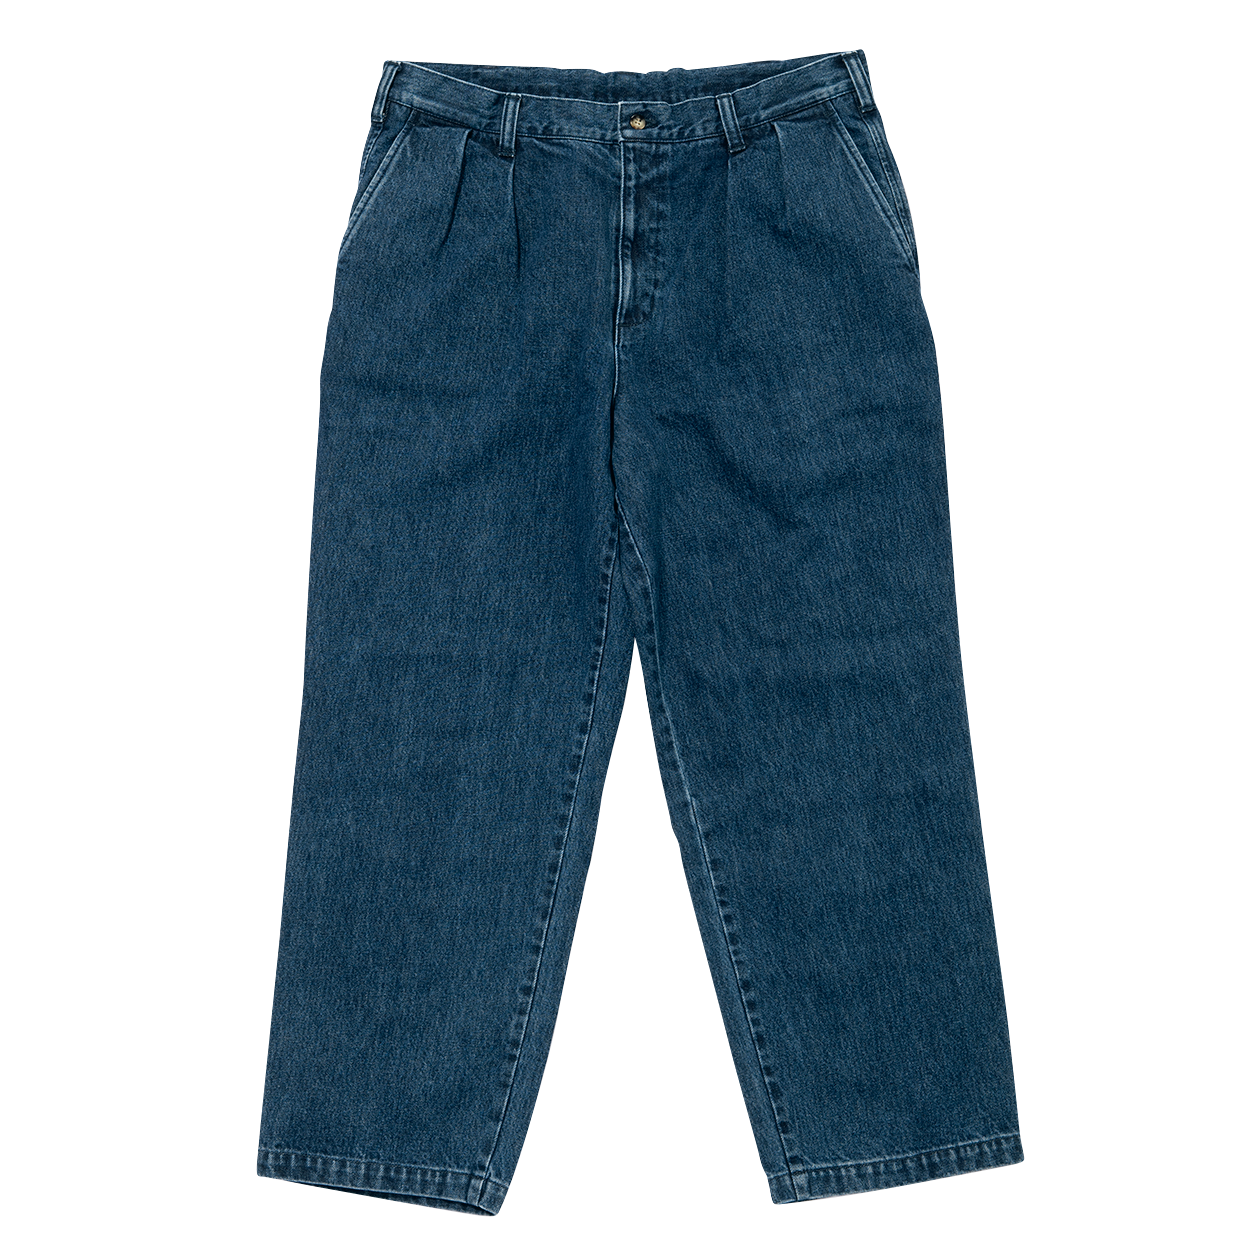 The Classic DenimTrousers